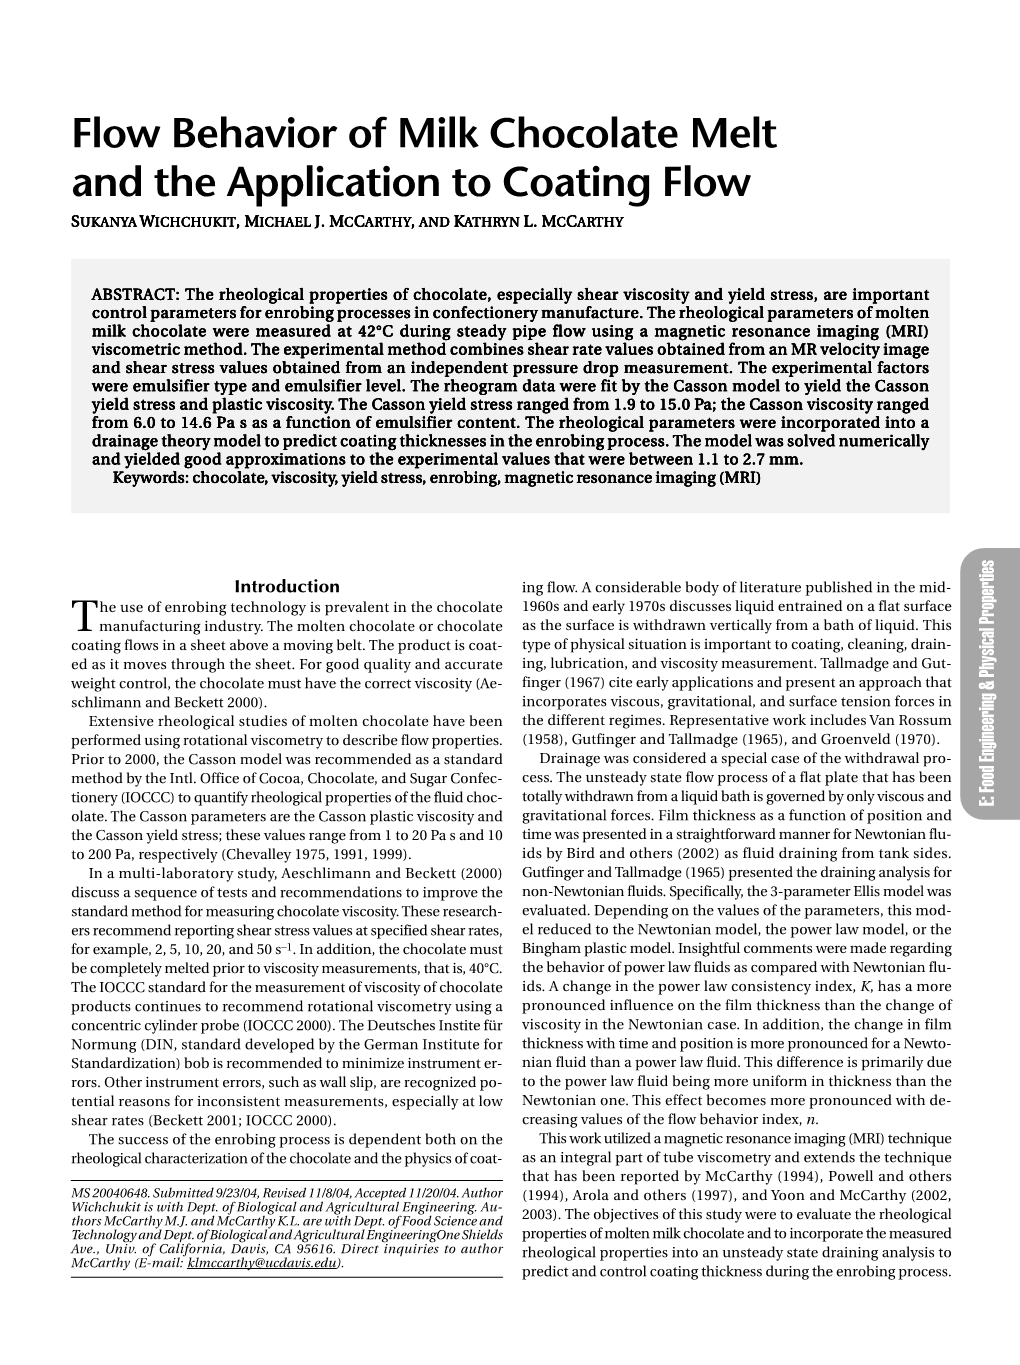 Flow Behavior of Milk Chocolate Melt and the Application to Coating Flow